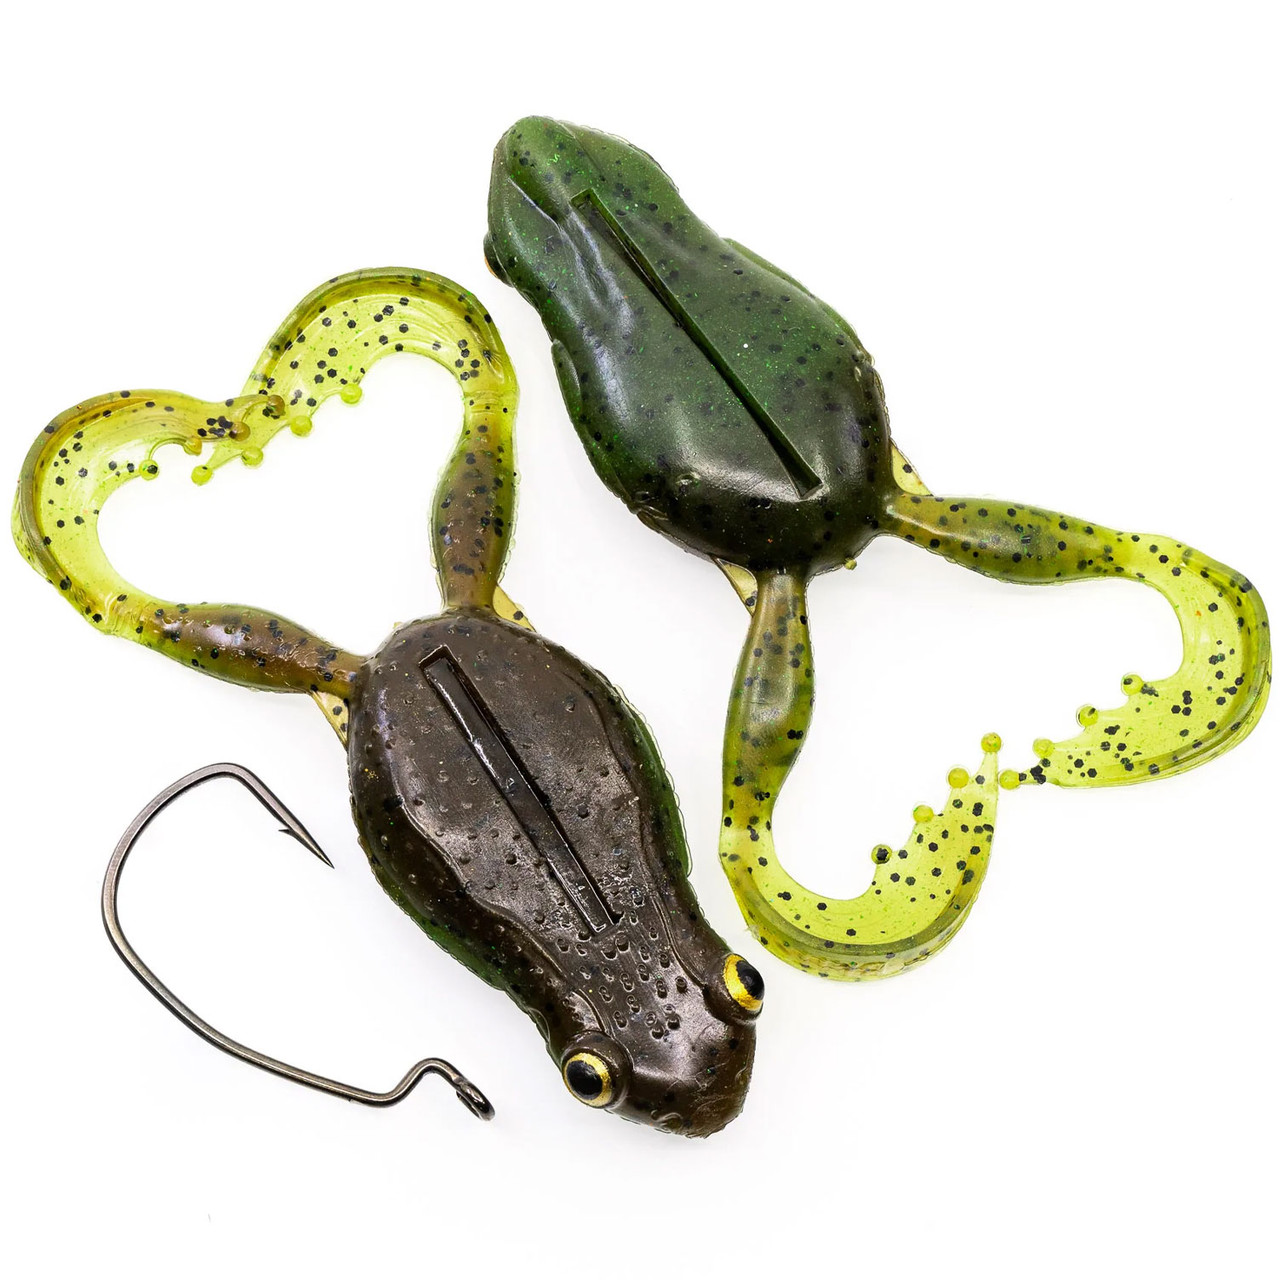 https://cdn11.bigcommerce.com/s-55834/images/stencil/1280x1280/products/5193/19278/chasebaits-flexi-frog-lure-green-pumpkin-watermelon__94836.1658575962.jpg?c=2